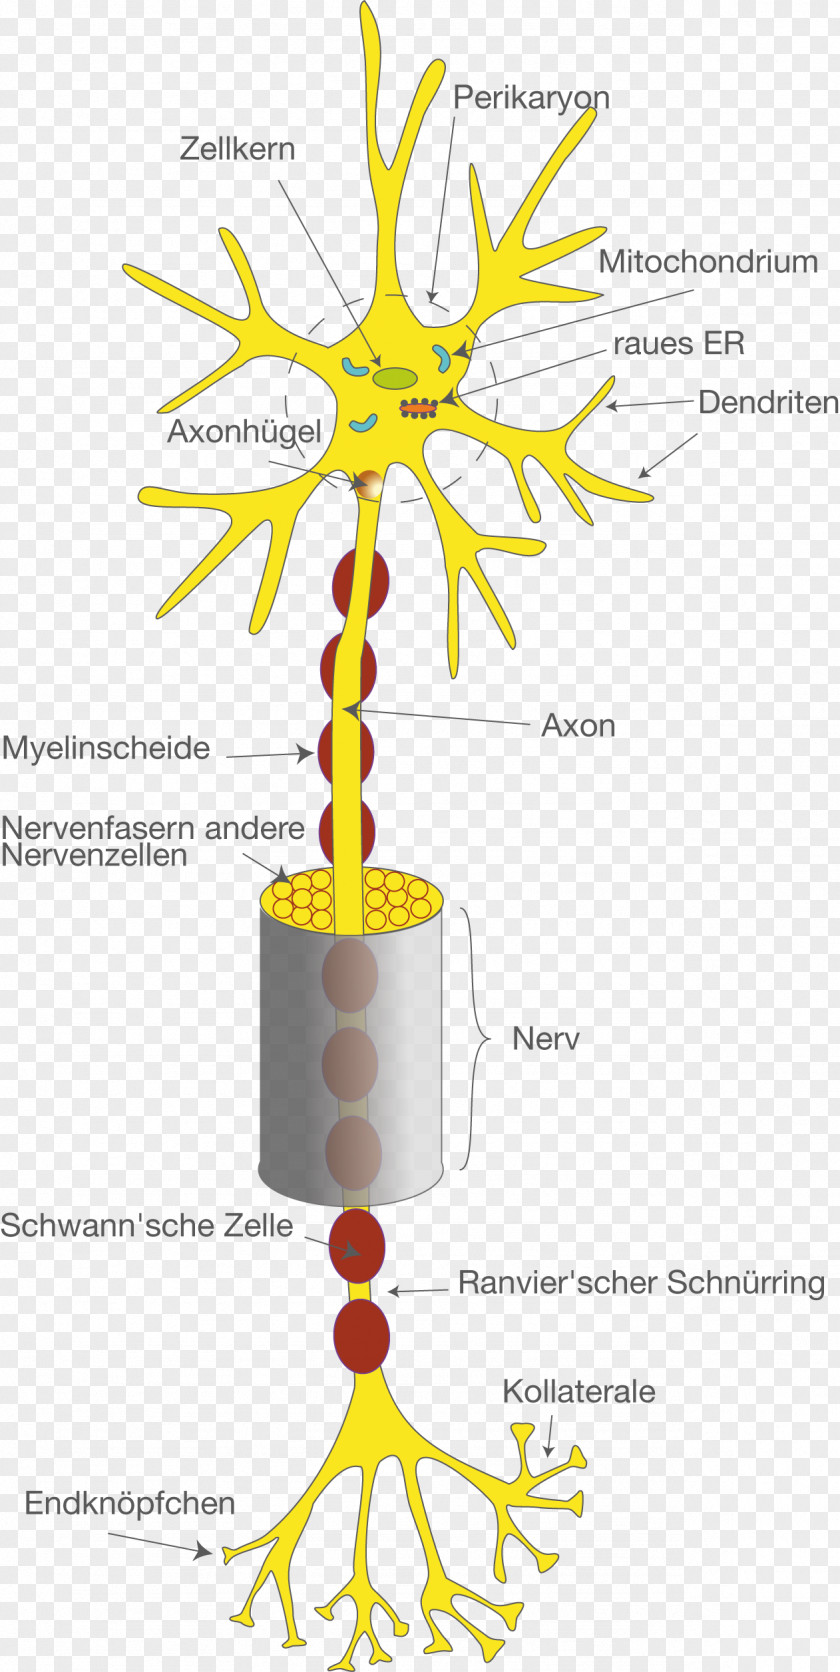 Brain Neuron Collateraal Nervous System Dendrite Axon PNG